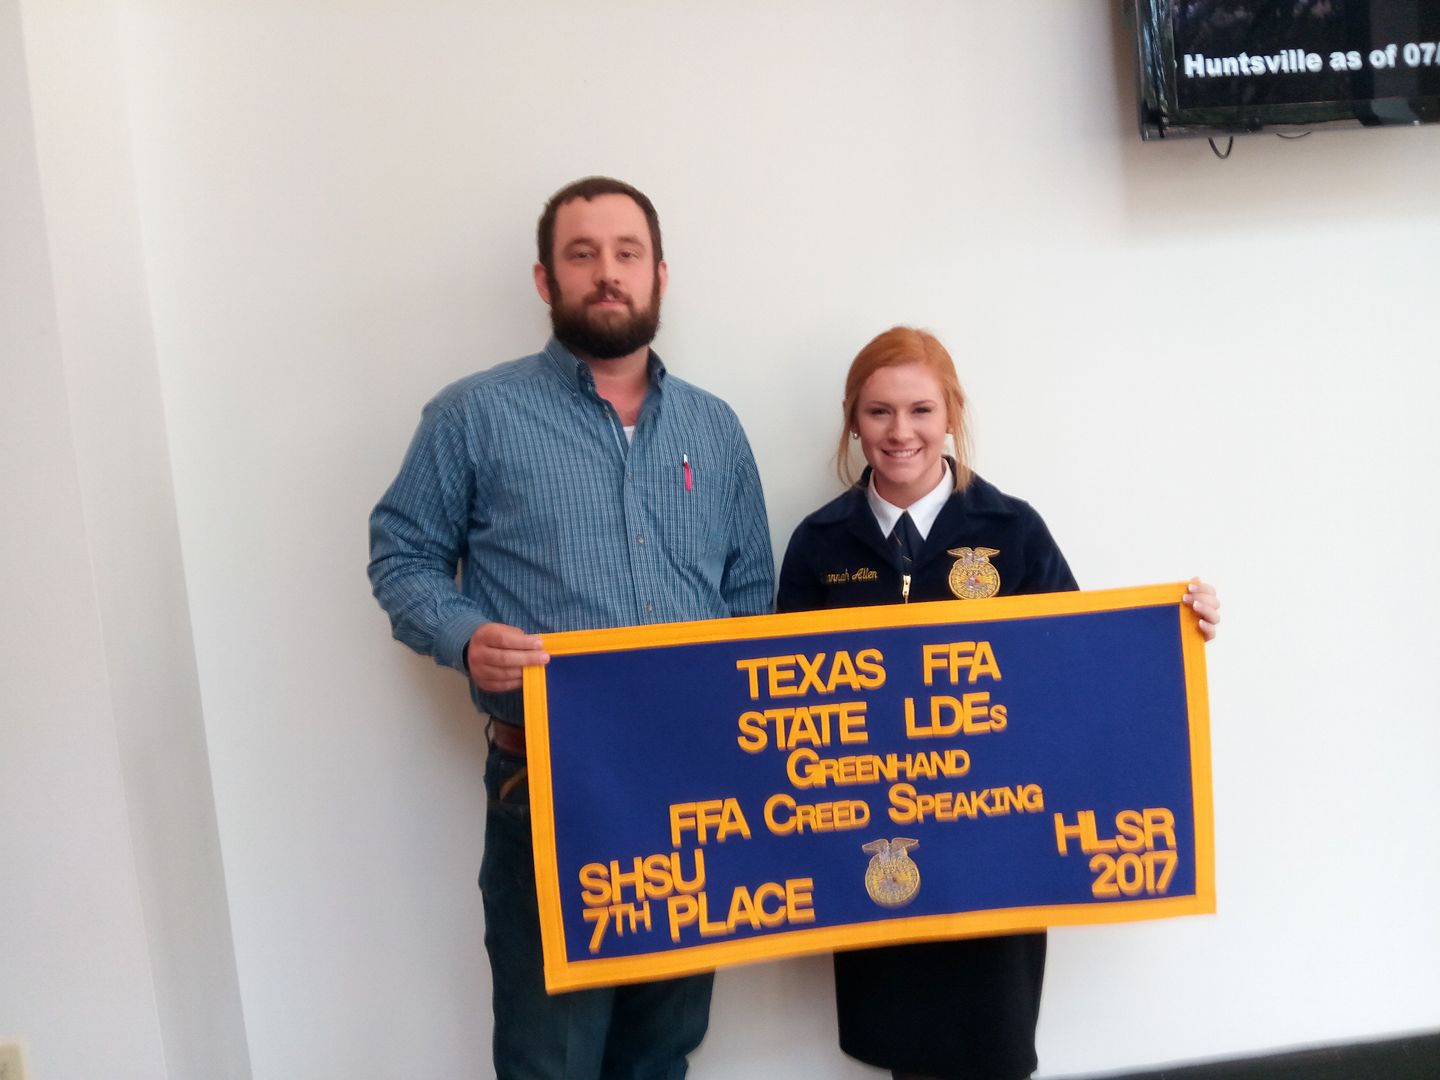 Savannah Allen of Sulphur Springs FFA Places 7th at State Finals in Greenhand Creed